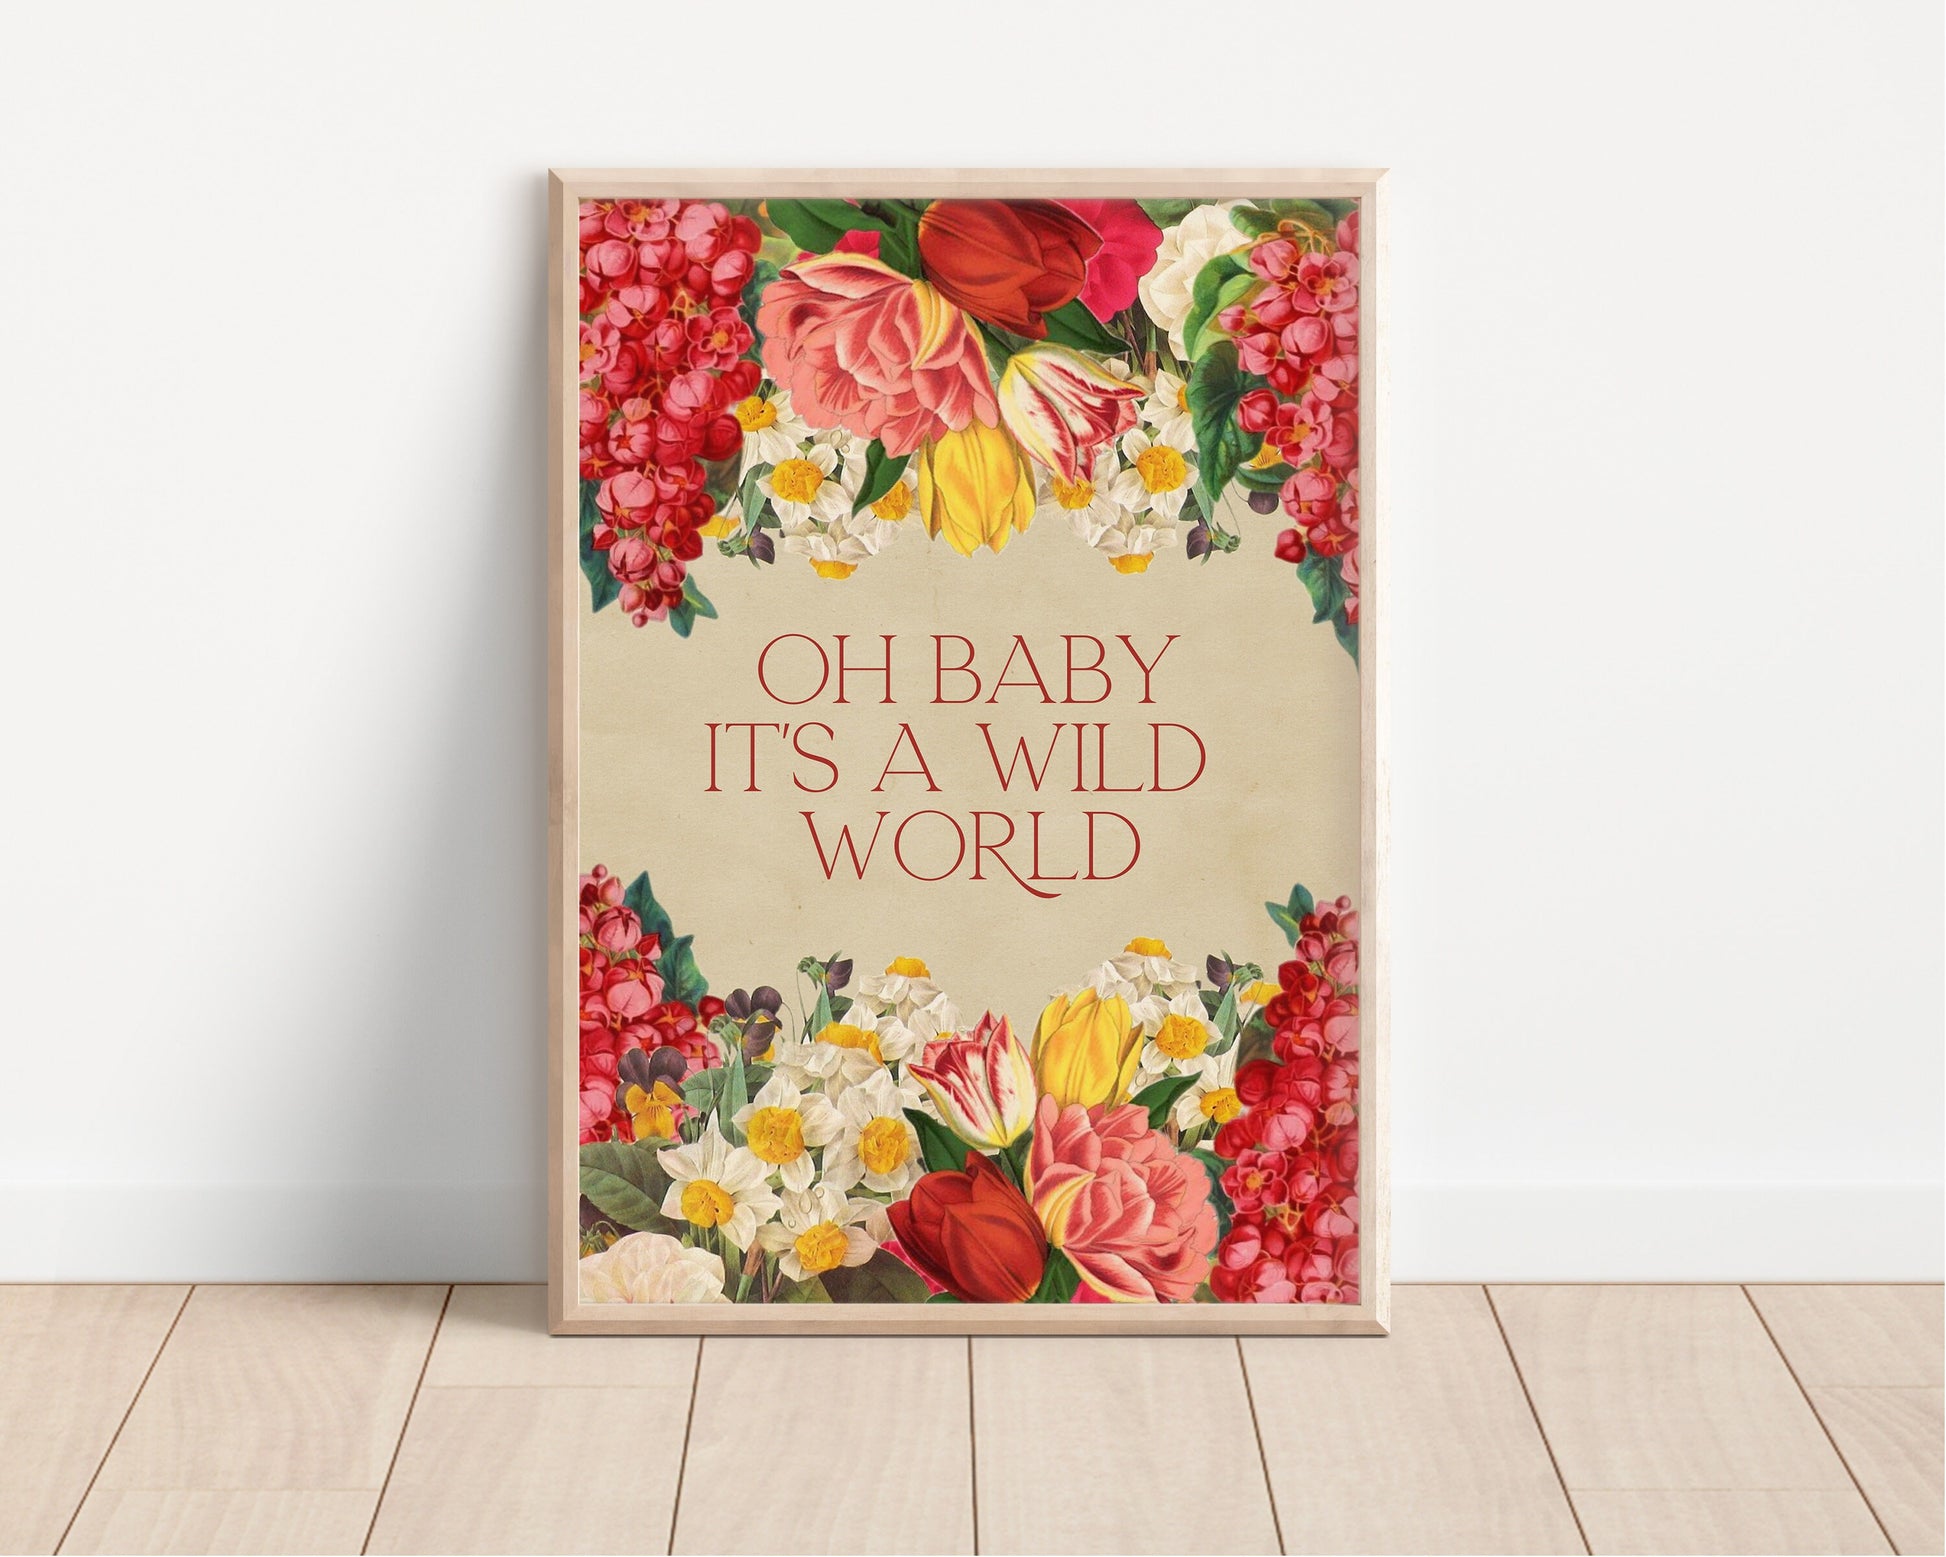 Oh Baby It's A Wild World Print, Floral Prints, Wild Flowers, Floral Decor, Be Wild Quote, Happy Quote, Lyric Prints, Music Inspired Prints